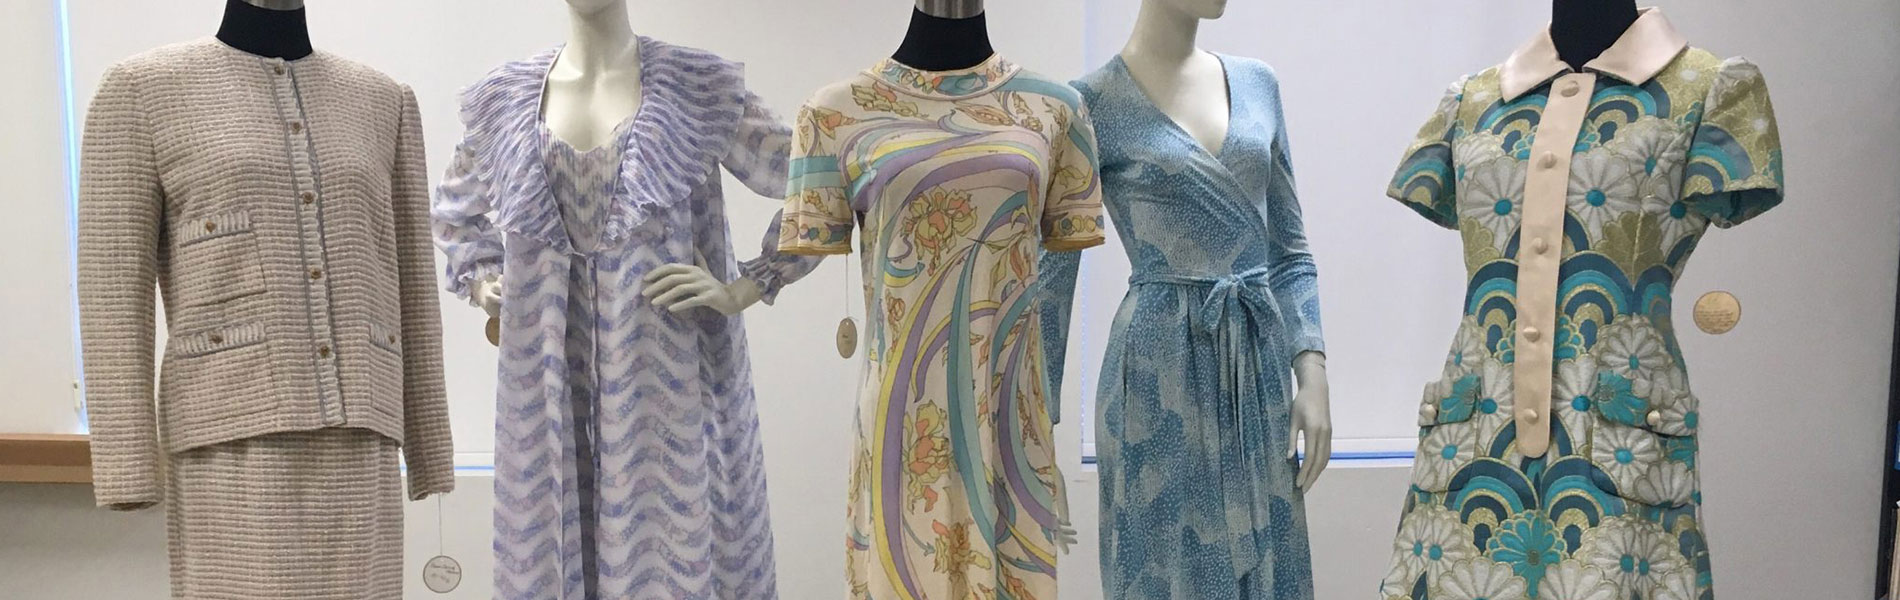 Five patterned pastel garments, including designs by Emilio Pucci and Coco Chanel